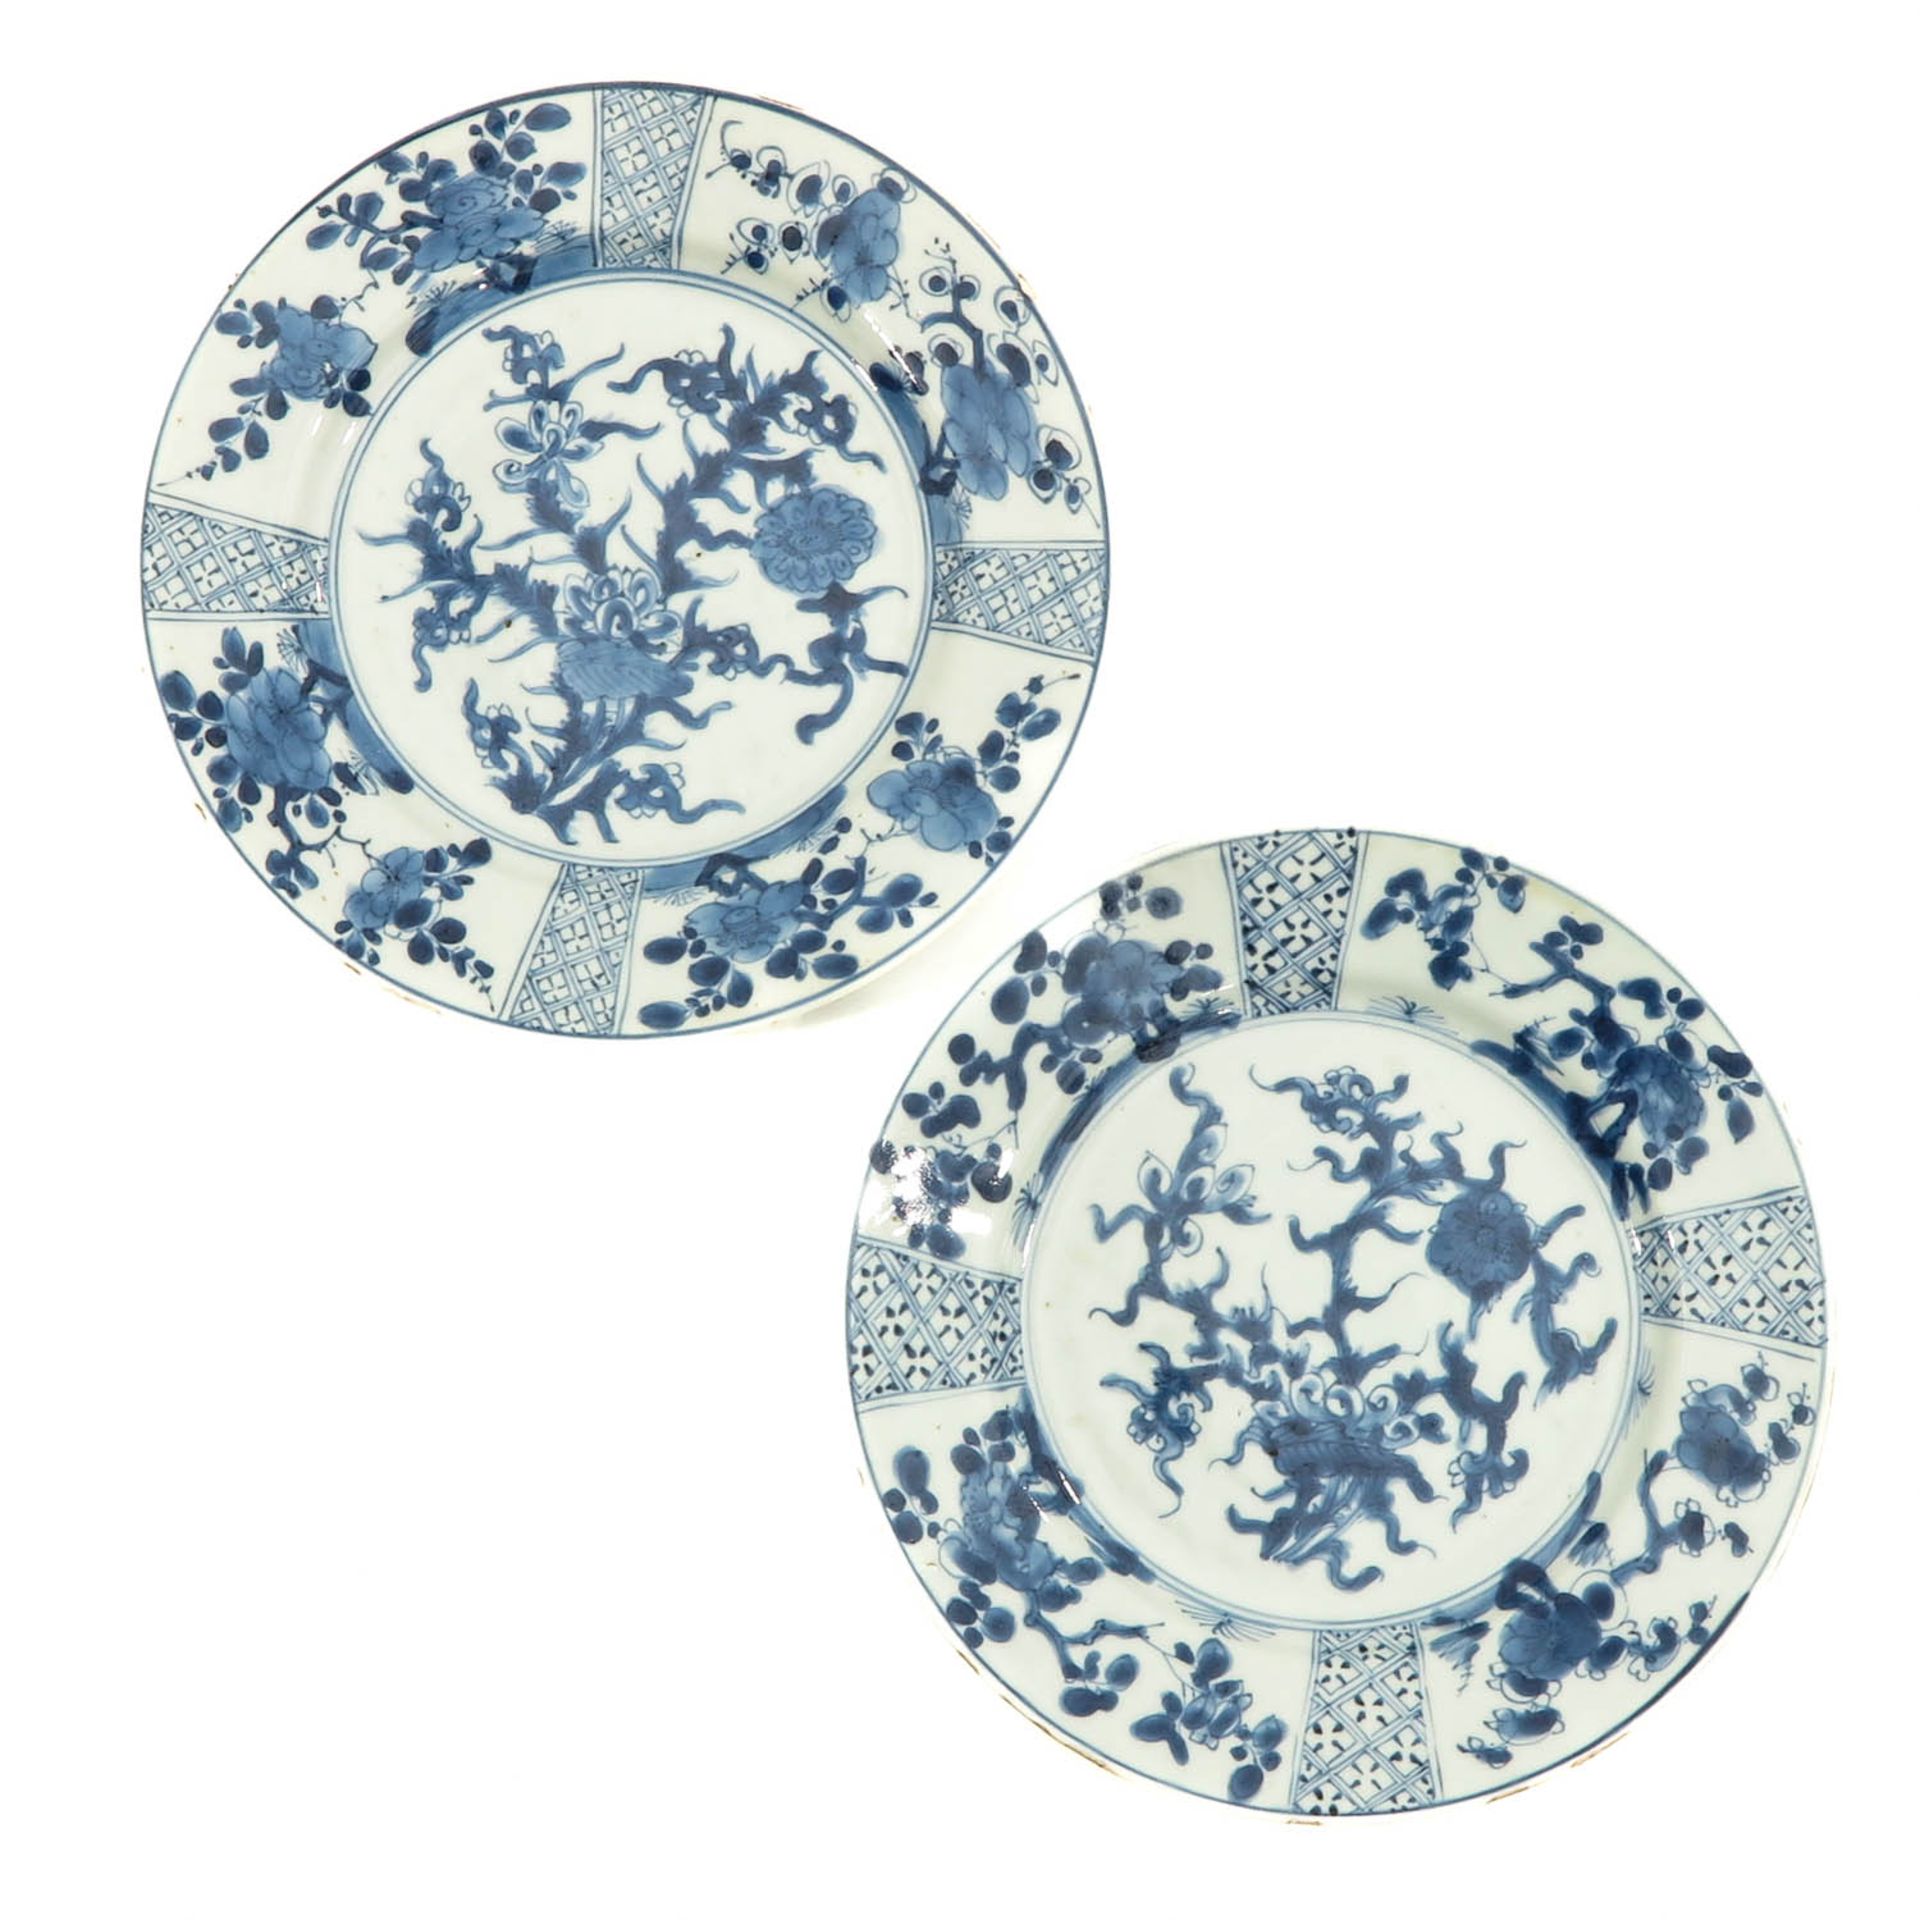 A Collection of 4 Blue and White Plates - Image 5 of 10